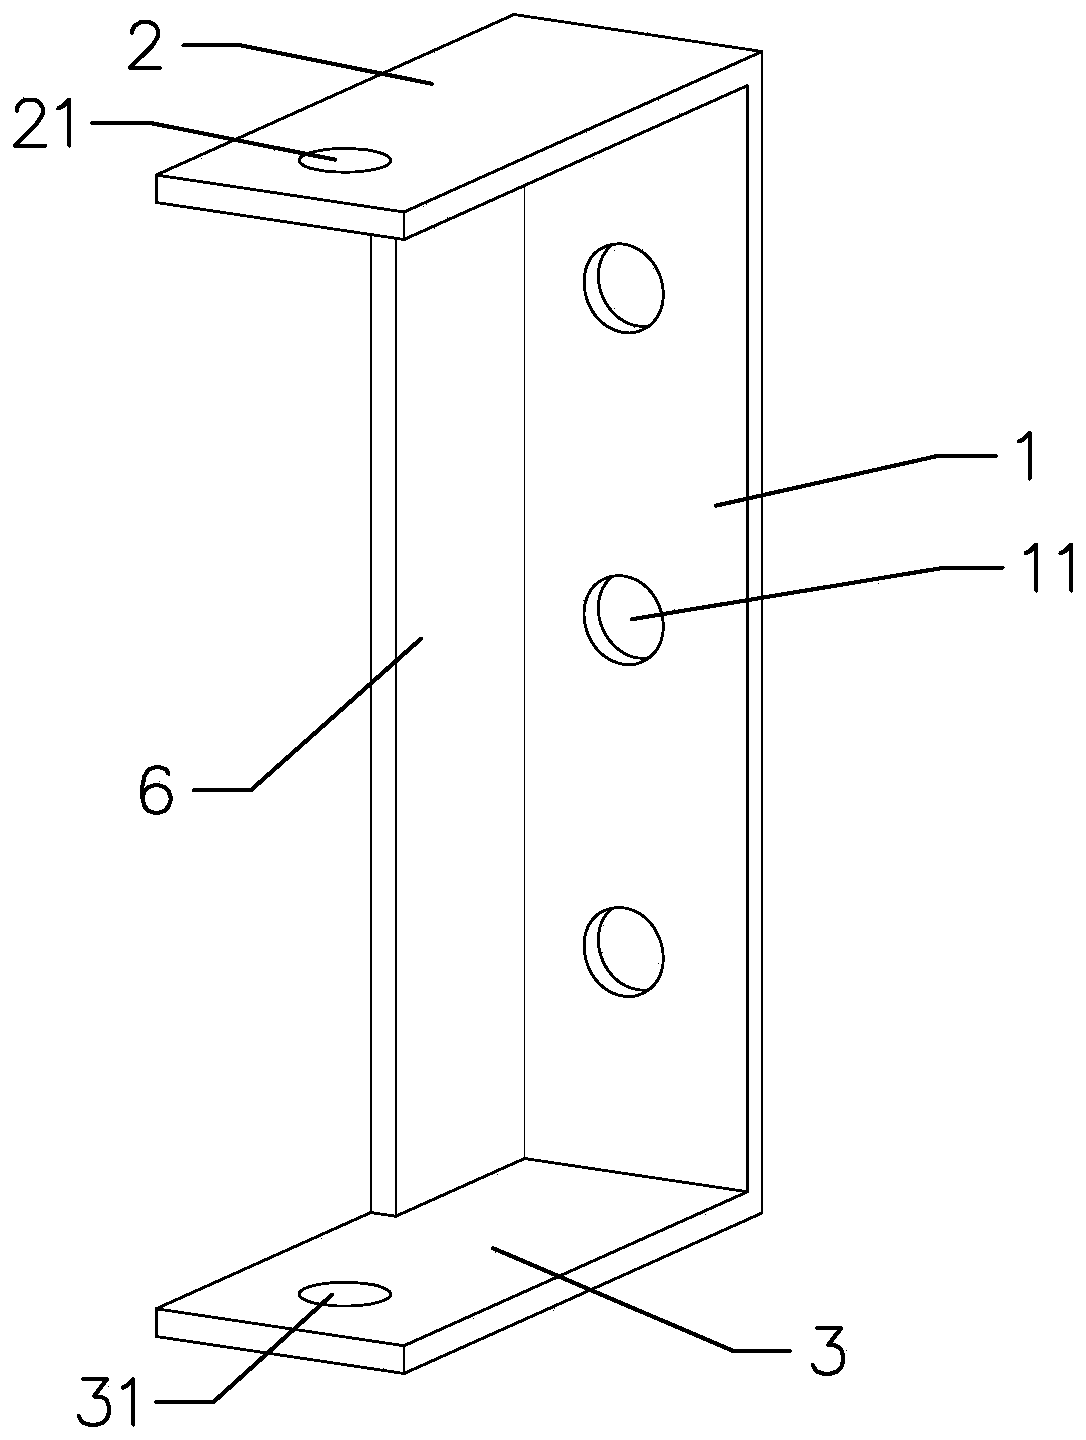 Interconnected bracket in compatible with weak electric line and wiring method